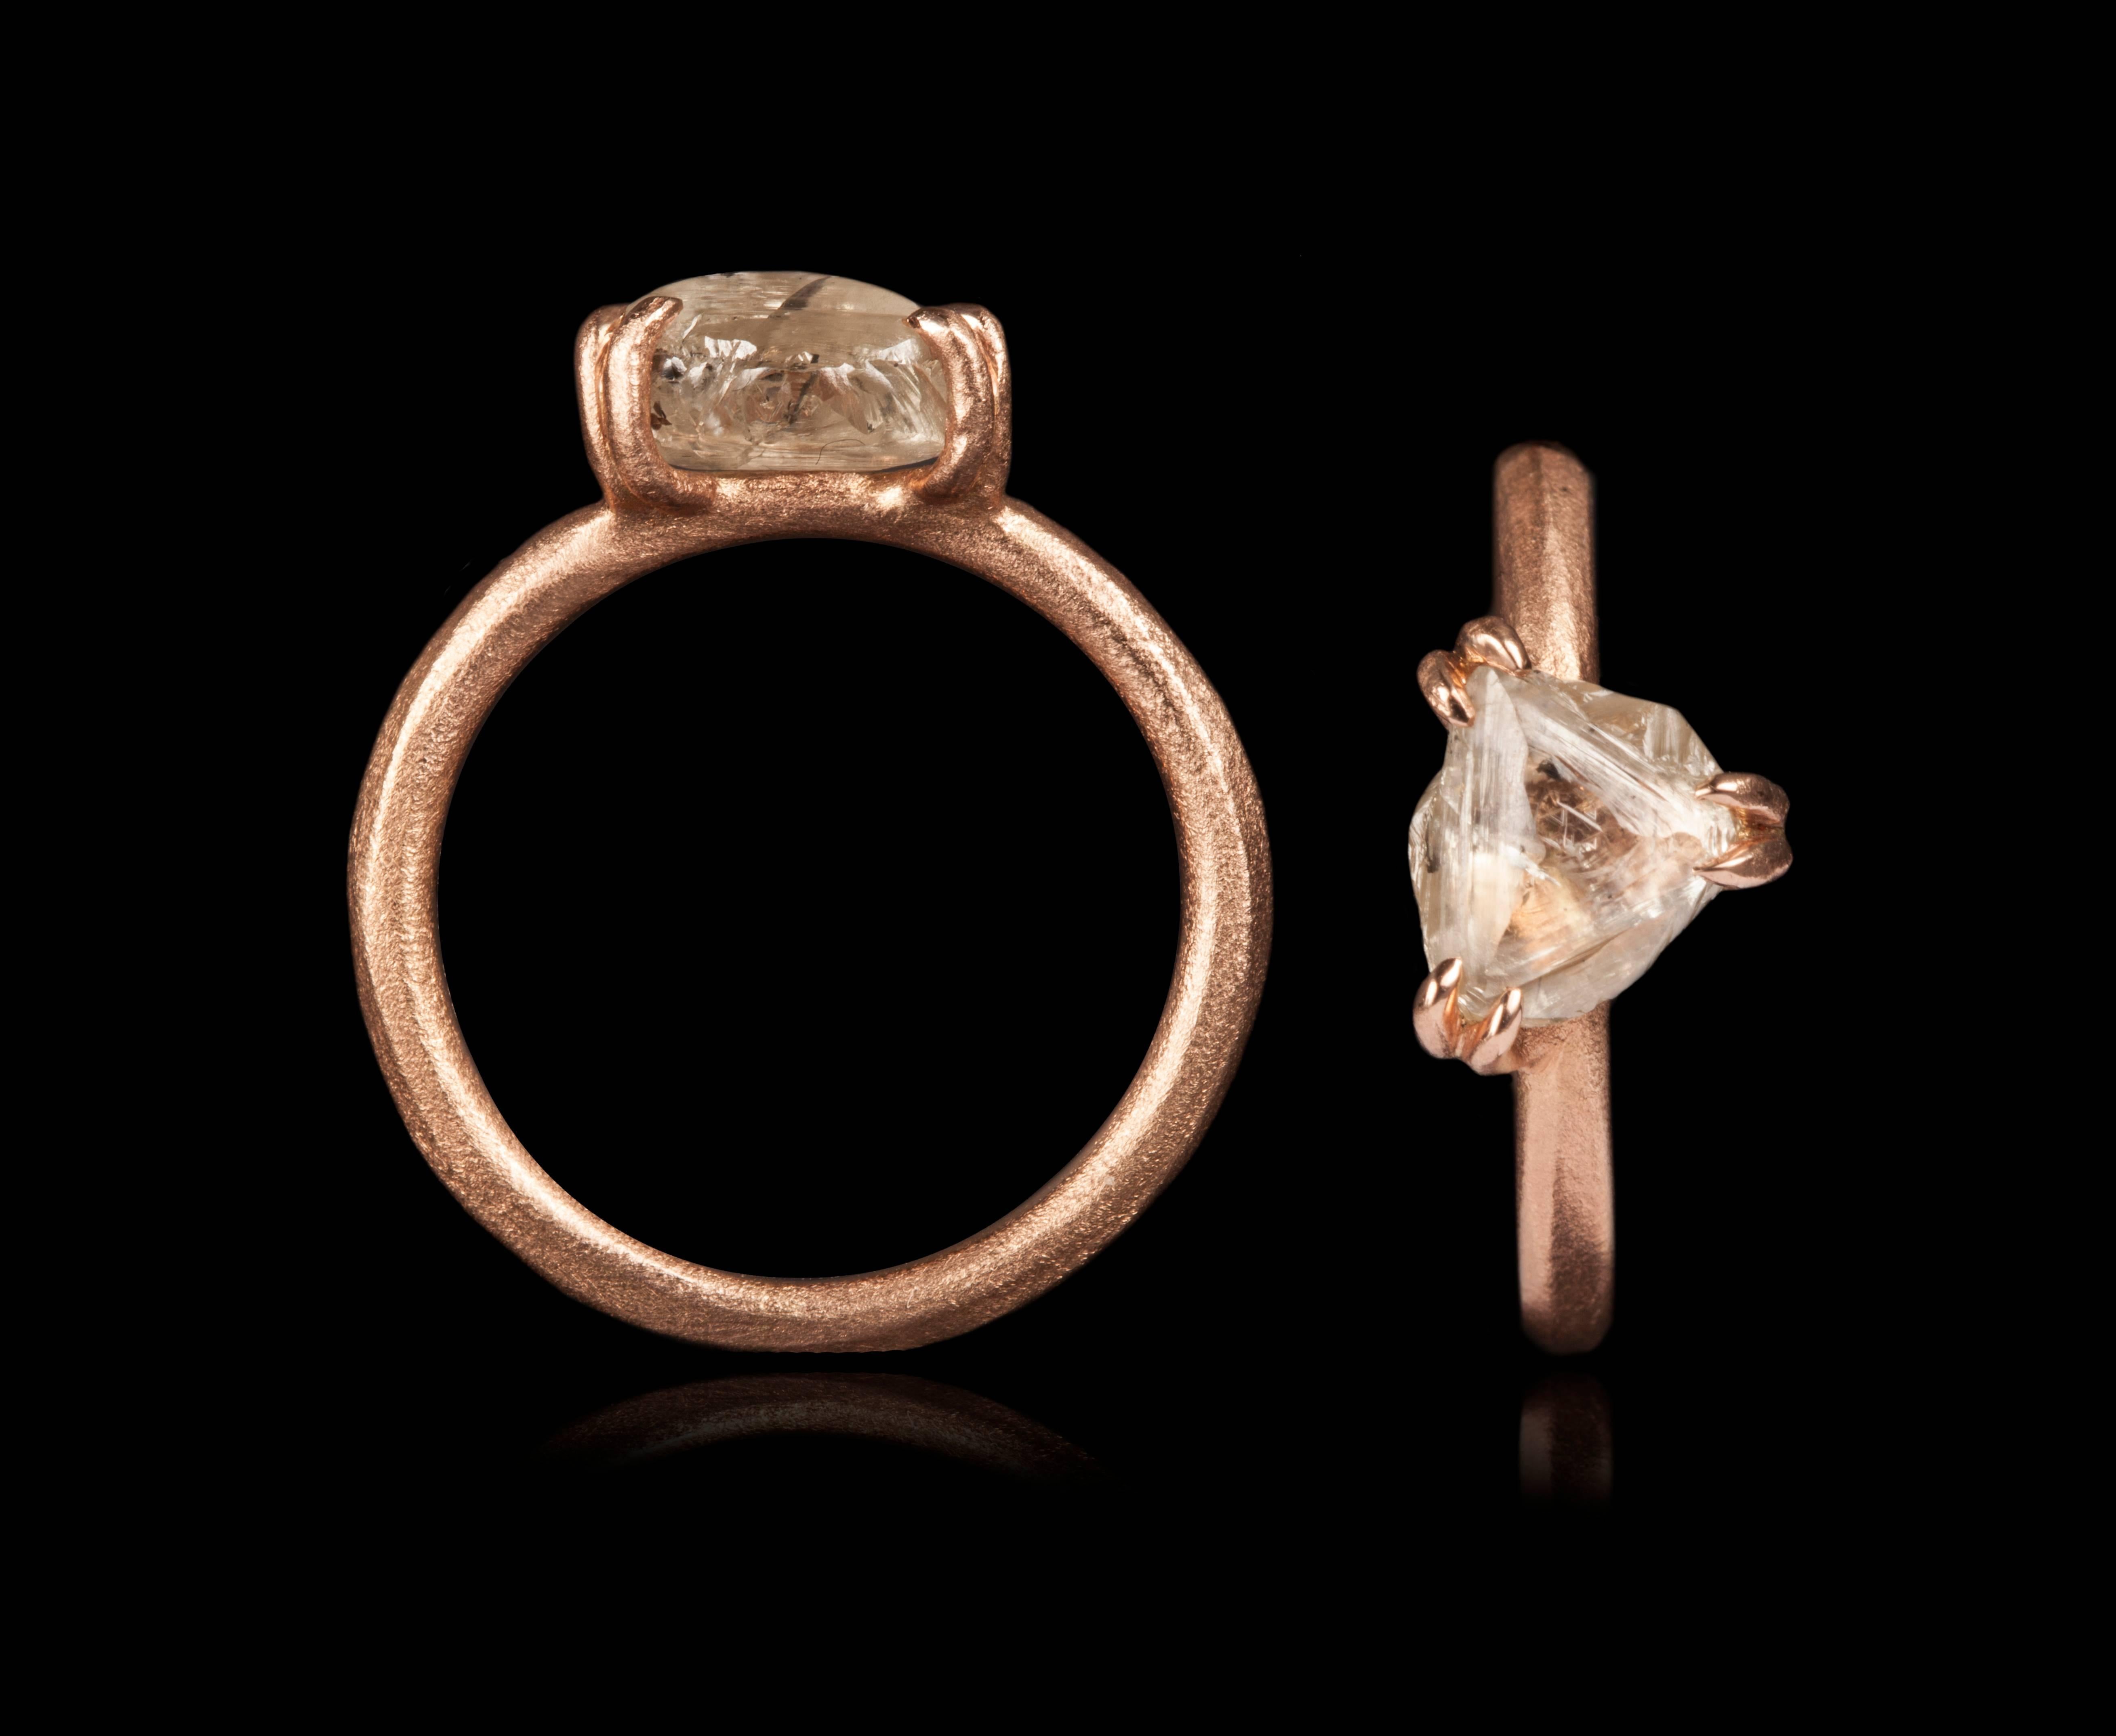 2.67 ct. Natural White Greyish Triangle Rough diamond in 14K handcrafted rose gold ring.

Every rough diamond from Roughdiamonds dk has been personally handpicked by Maya Bjørnsten. The diamonds we reject are sent back to be cut into regular